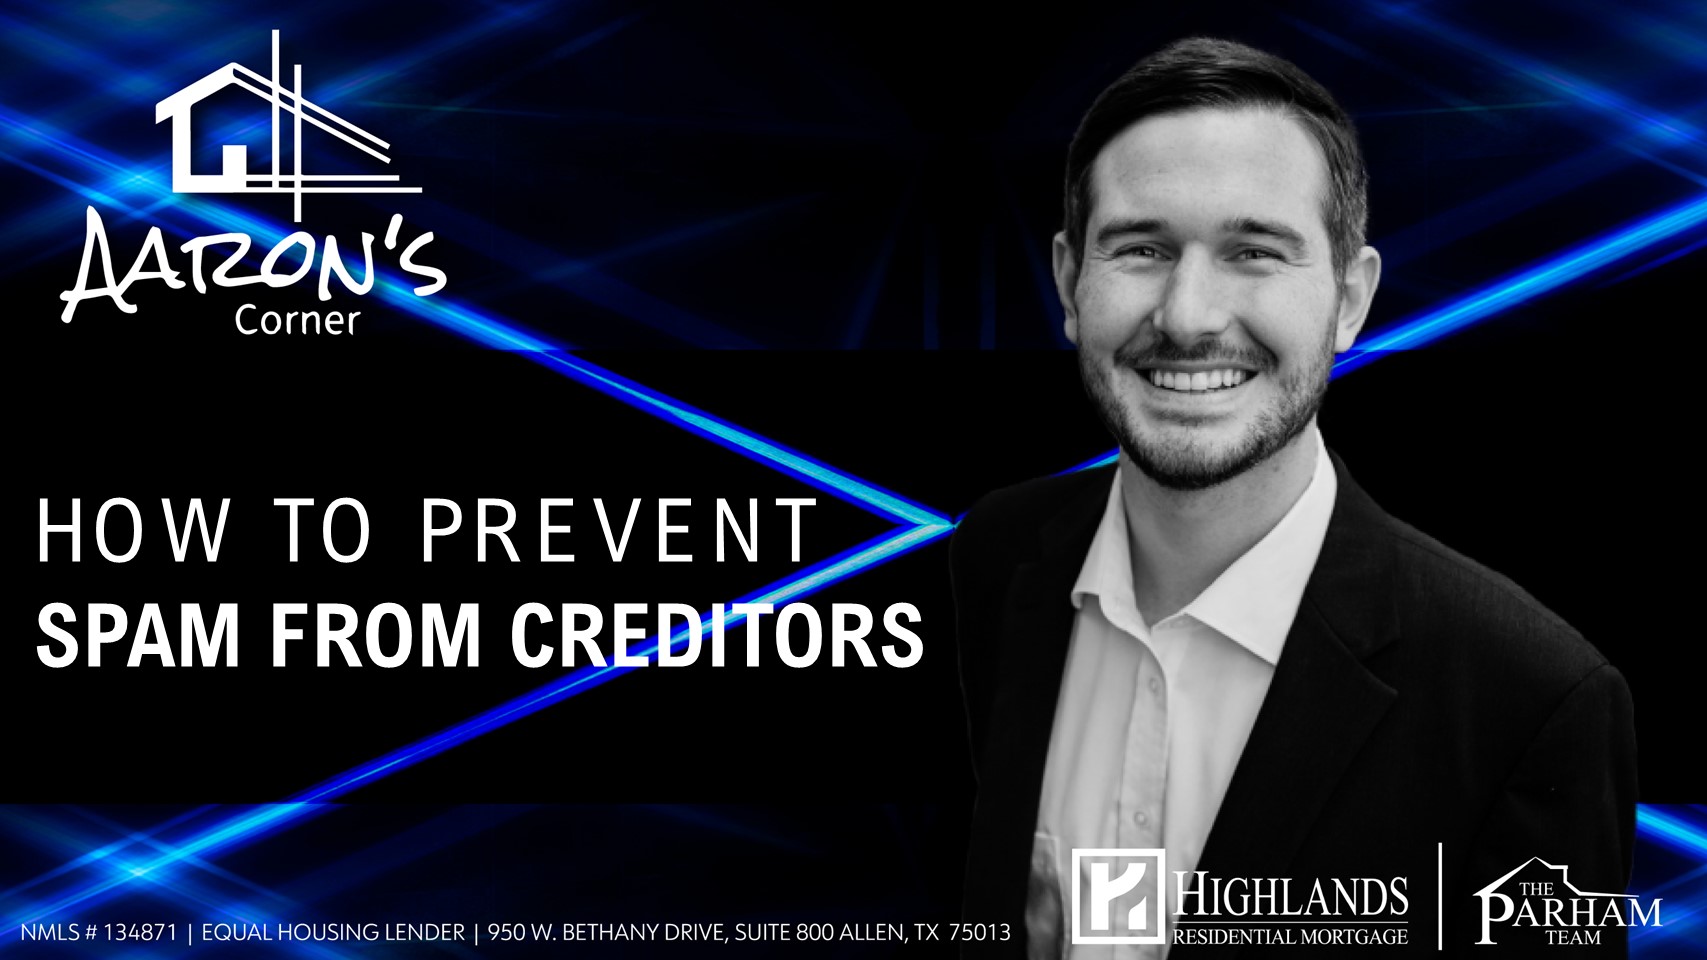 HOW TO PREVENT SPAM FROM CREDITORS